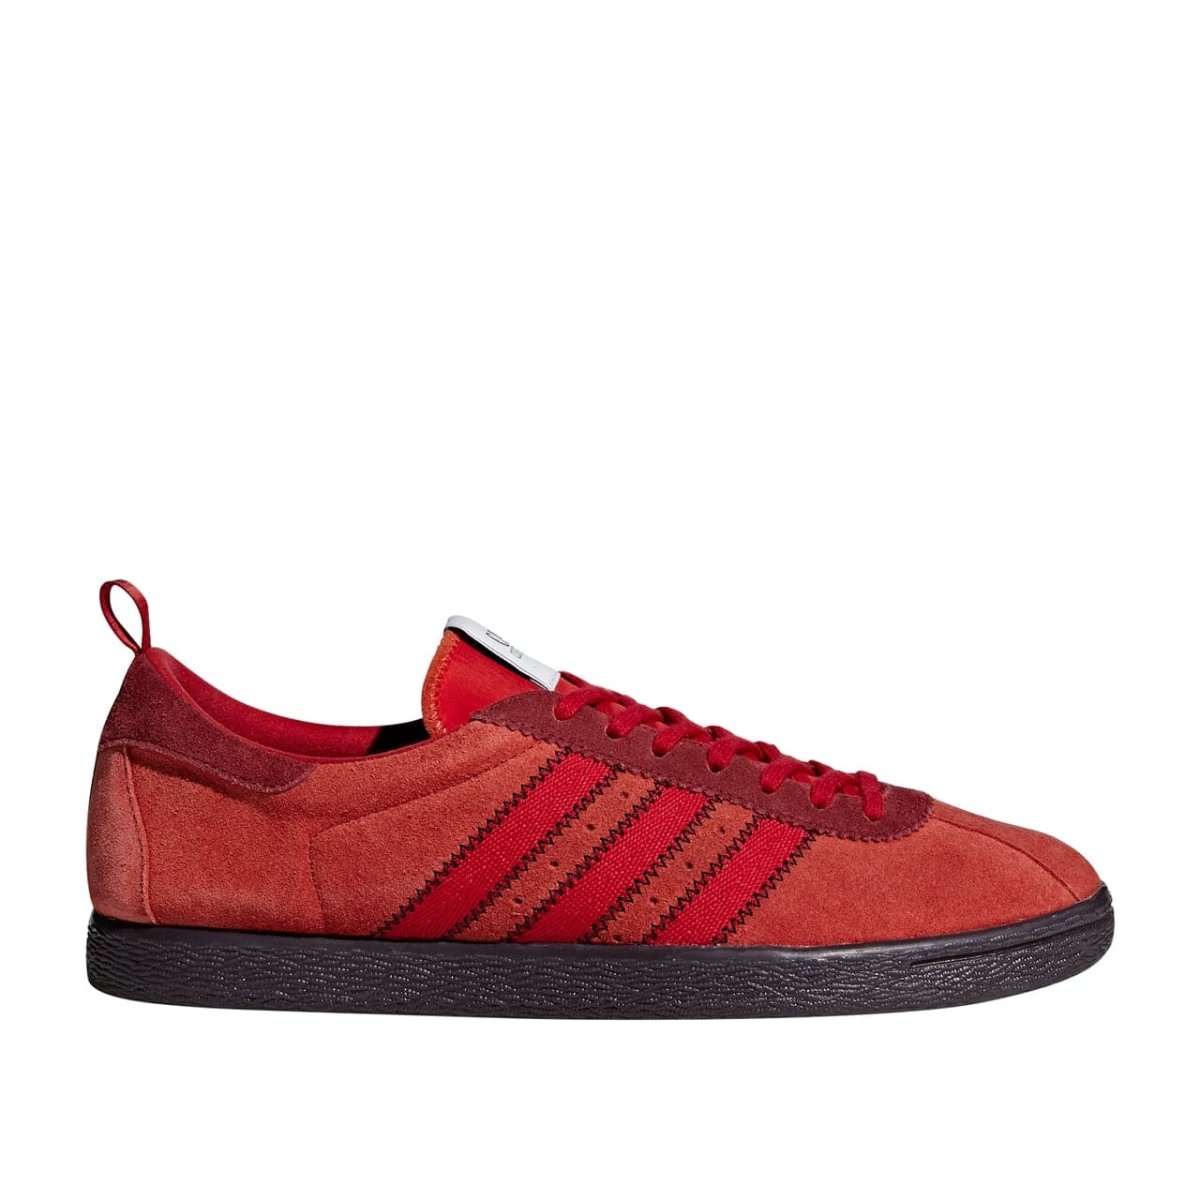 adidas by C.P. Company Tobacco (Rot)  - Allike Store